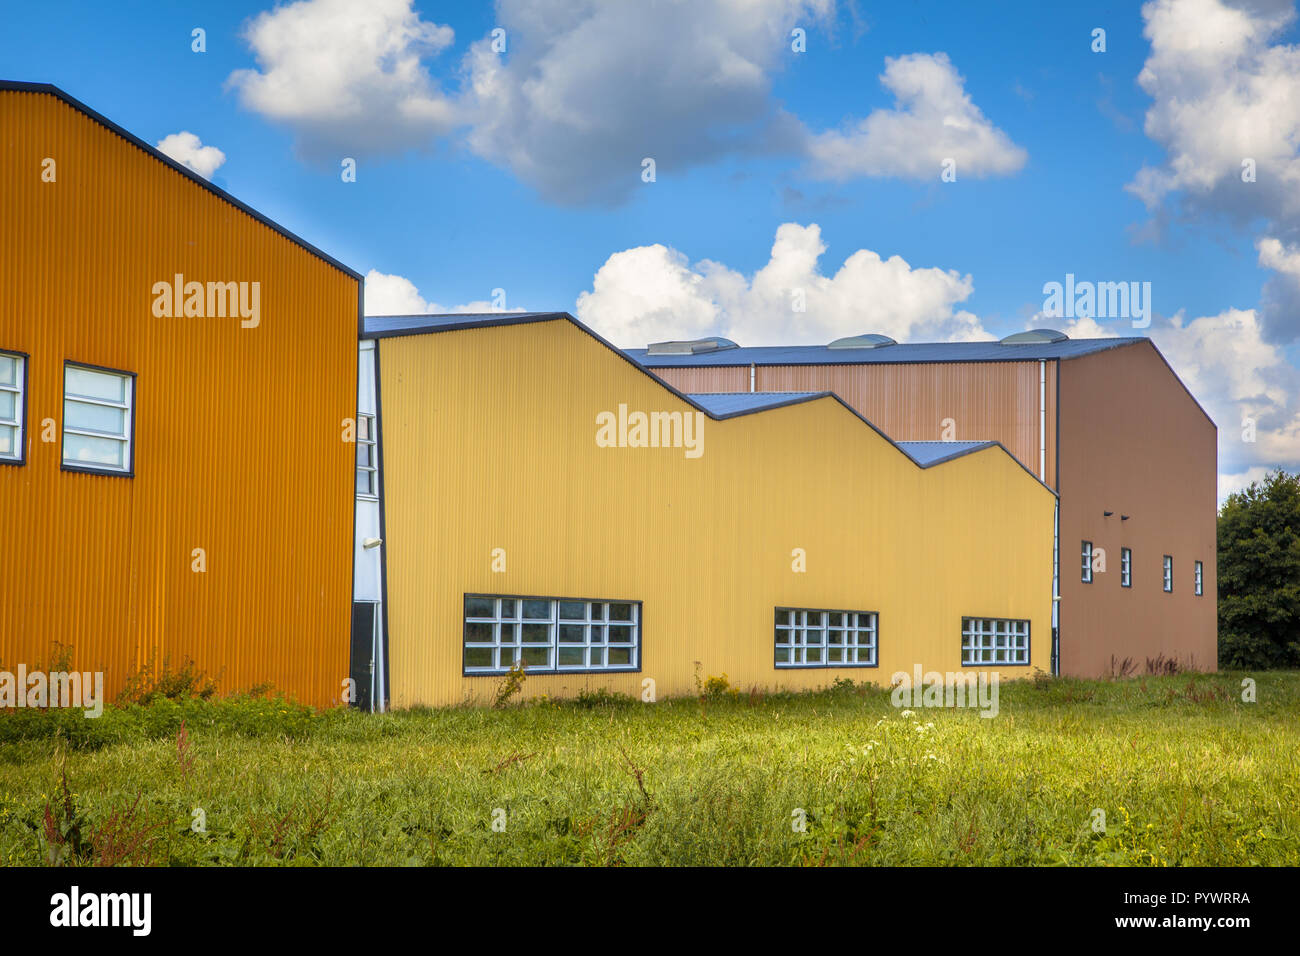 Colorful new contemporary industrial building in a commercial area under development Stock Photo